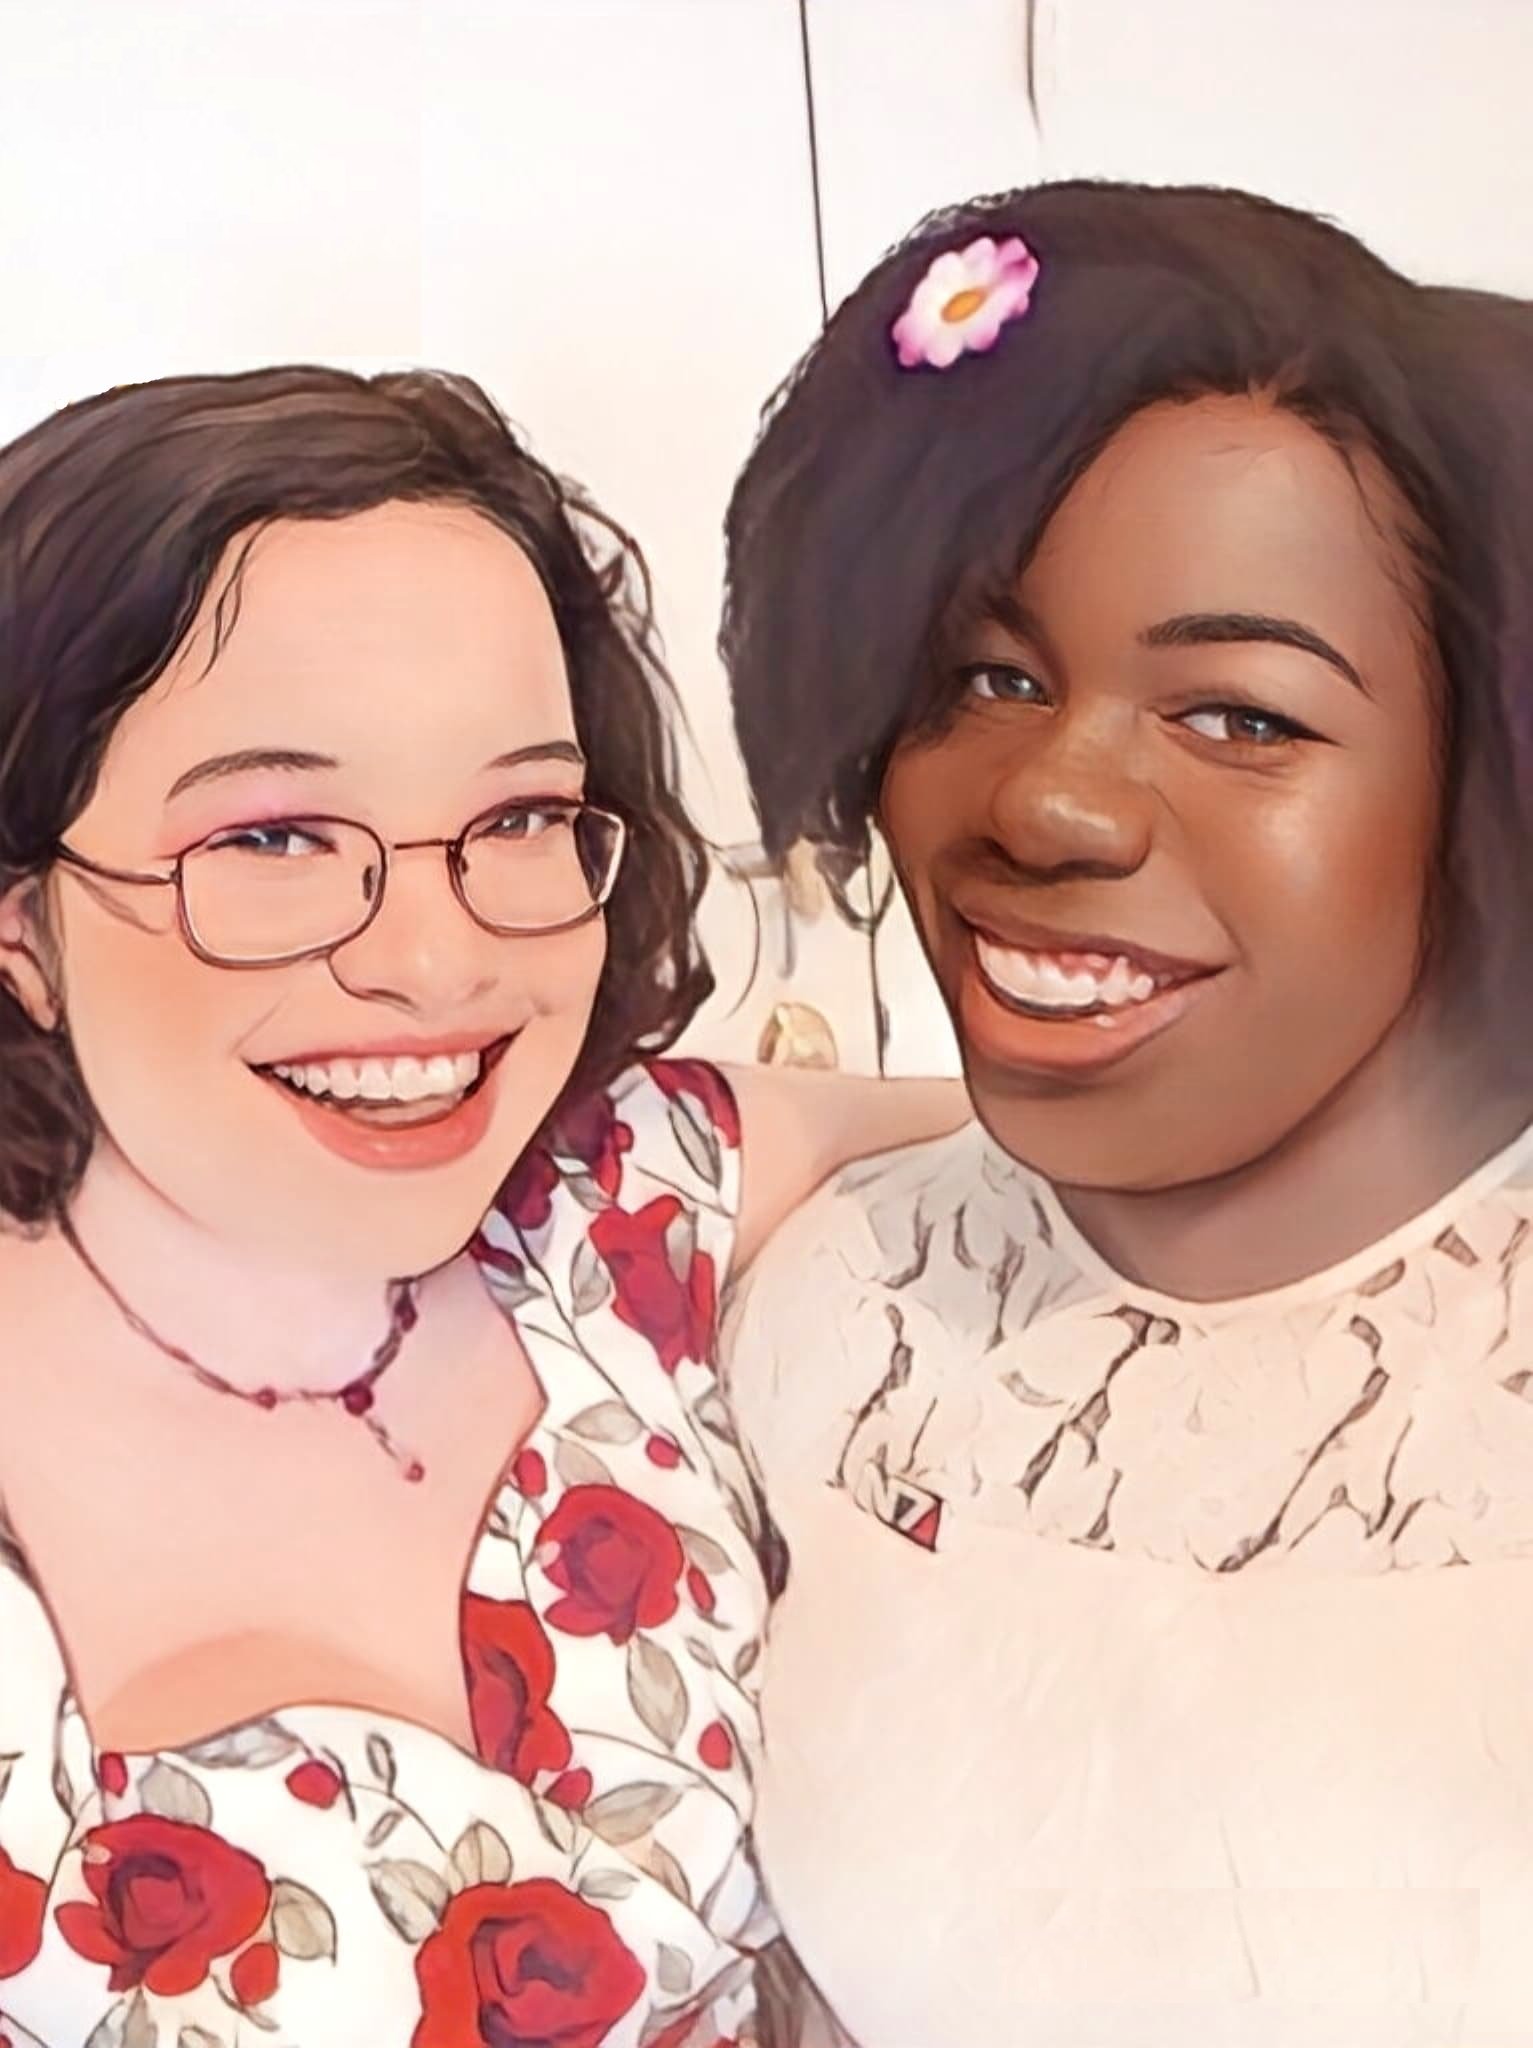  a cartoon style image of 2 women smiling. The one on the left has light skin, brown eyes and hair, and and is wearing glasses, a necklace with red jewels on it, and a white dress with red flowers and green leaves on it. The one on the right has dark